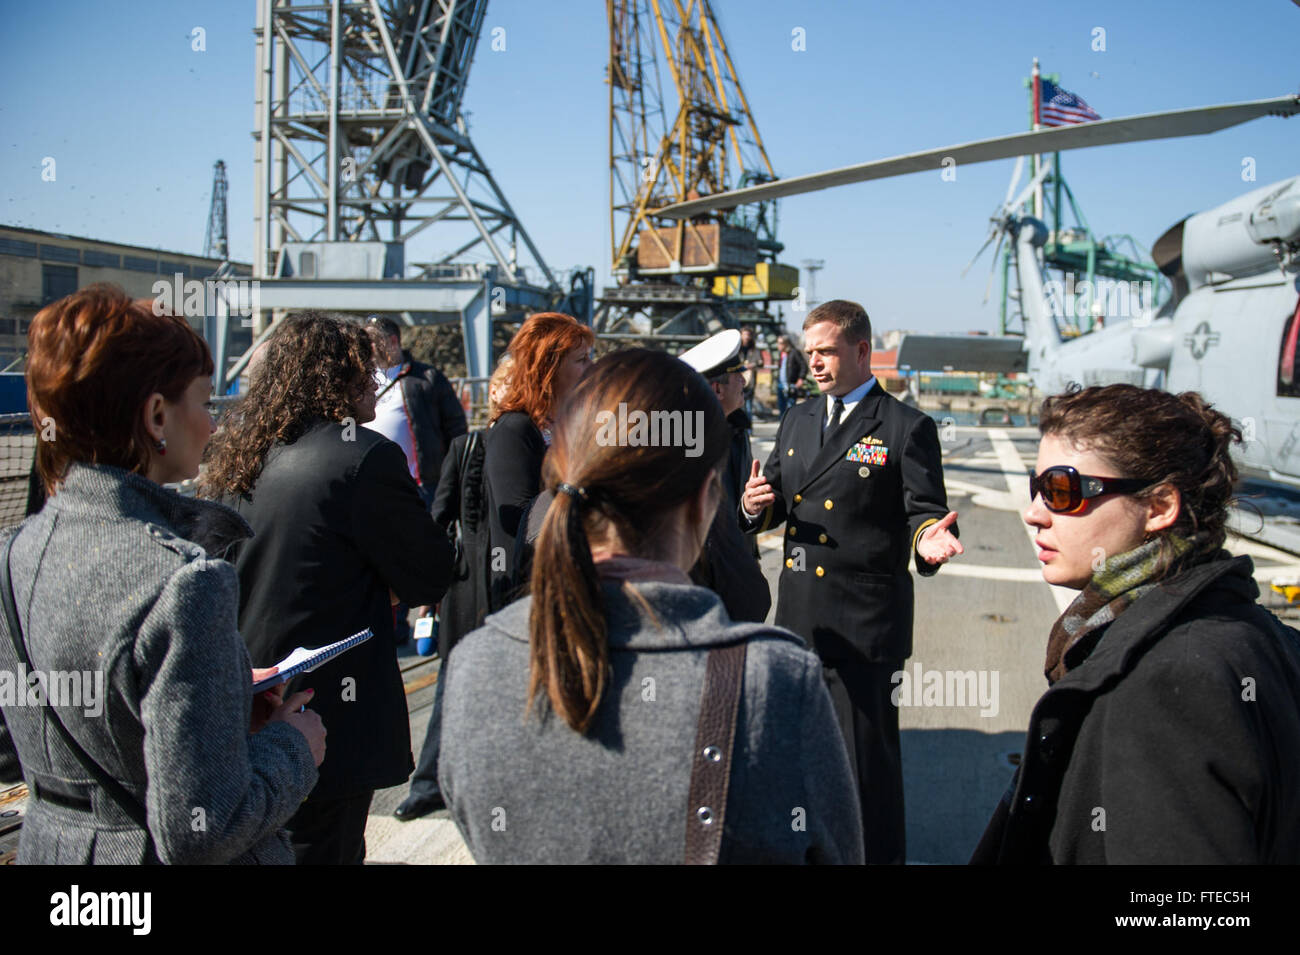 140314-N-EI510-132 VARNA, Bulgaria (March 14, 2014) Cmdr. Andrew Biehn, commanding officer of the Arleigh Burke-class guided-missile destroyer USS Truxtun (DDG 103) gives a tour to media aboard the Truxtun, which is currently in Varna Bulgaria following a multilateral exercise with Romania and Bulgaria as part of Theater Security Cooperation efforts in the Black Sea. The Truxtun is deployed as part of the George H. W. Bush Strike Group on a scheduled deployment supporting maritime security operations and theater security cooperation efforts in the U.S. 6th fleet area of operations. (U.S. Navy  Stock Photo